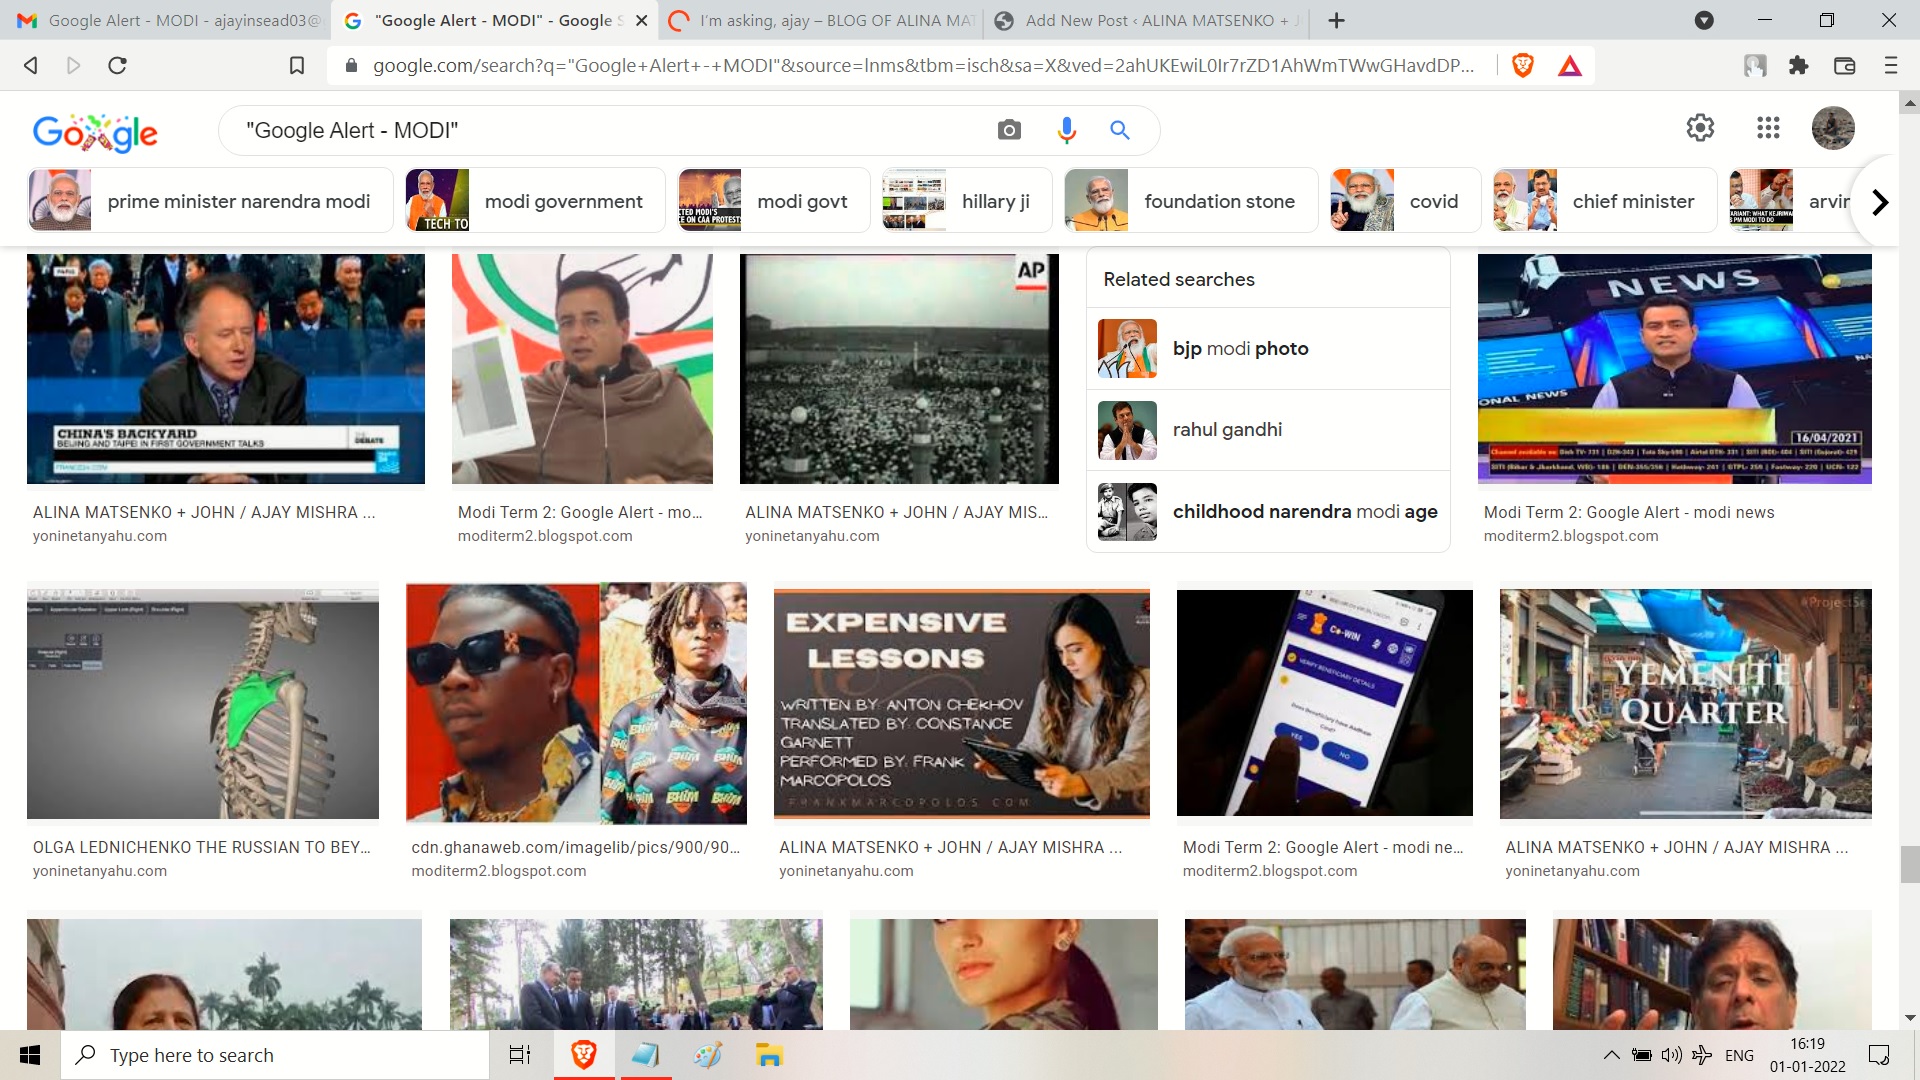 GOOGLE ALERT MODI HAPPY NEAY TYERA RAHUL GANDHI SIR AND MODI JI AND MRSSONIA GANDHI AD MSULIMS ALSO NOTJUST TO BRAHMIAND JEWS ONLY BUT END OWSIS AND KAHSN HATEED -- -----